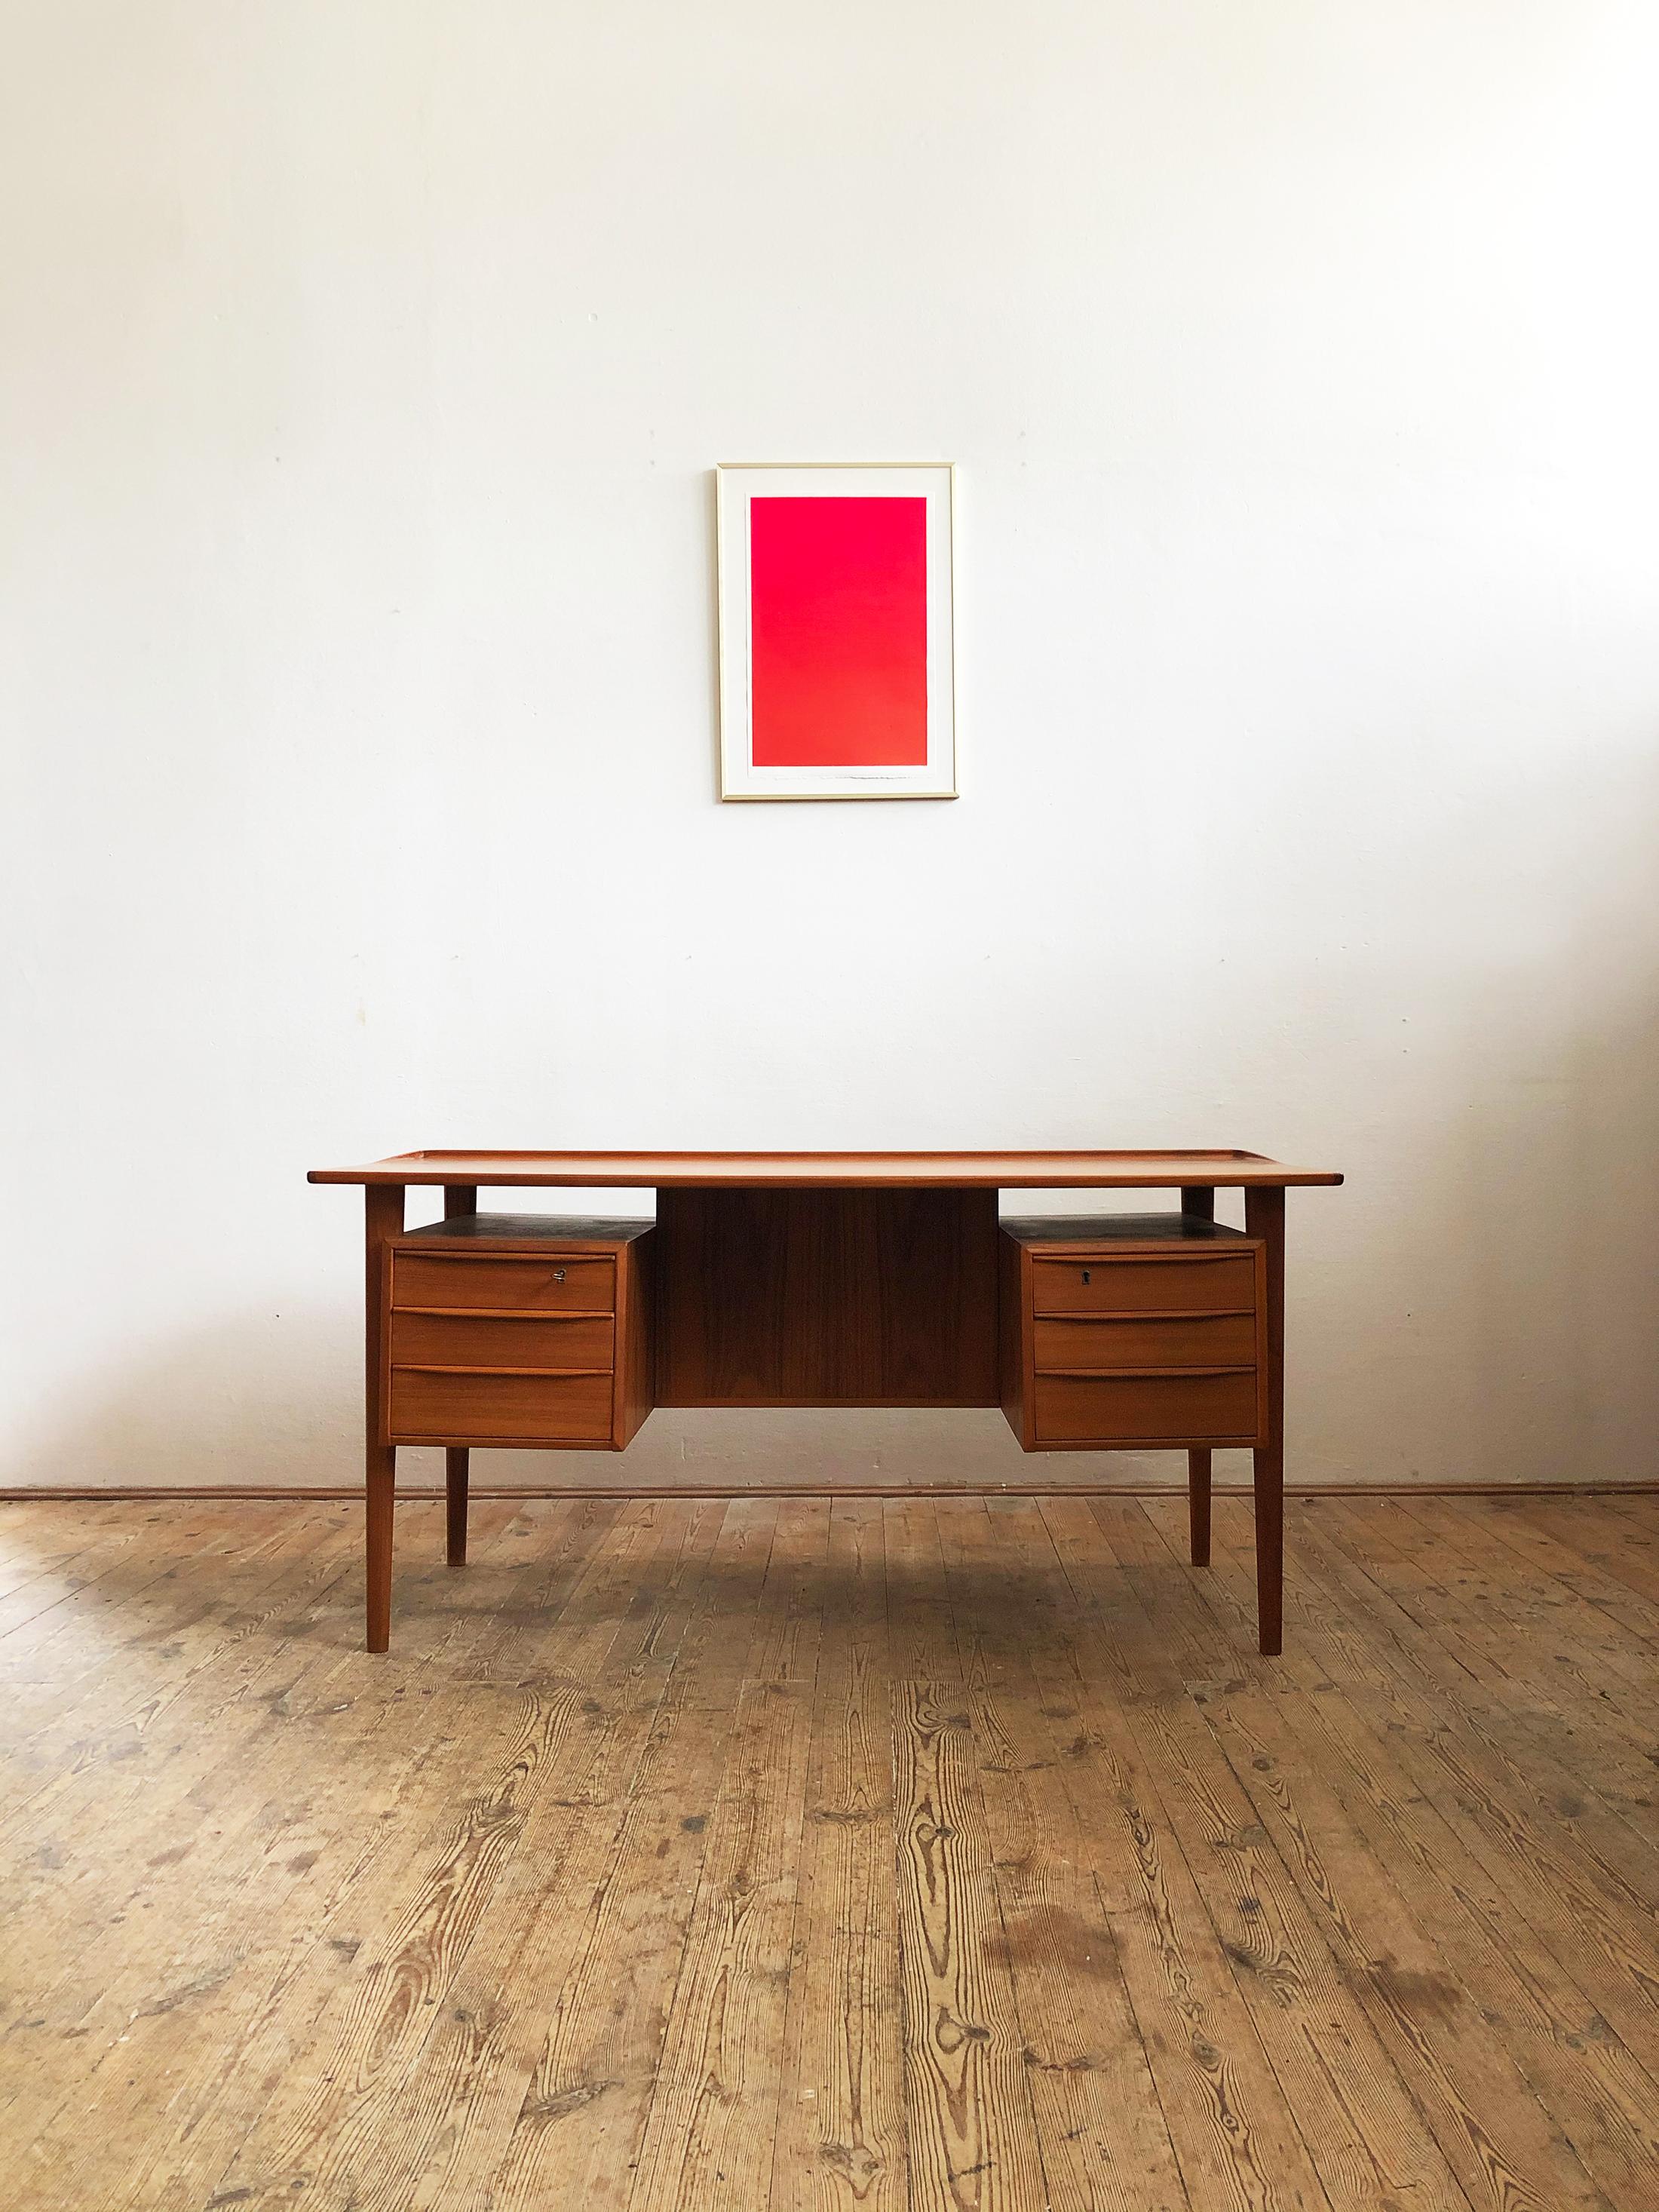 This free standing midcentury Danish writing desk was designed by Peter Løvig Nielsen for Løvig Dansk. The table is made of teak wood and features two sets of three drawers on each side and 2 storage compartments as well as a shelve on the tables